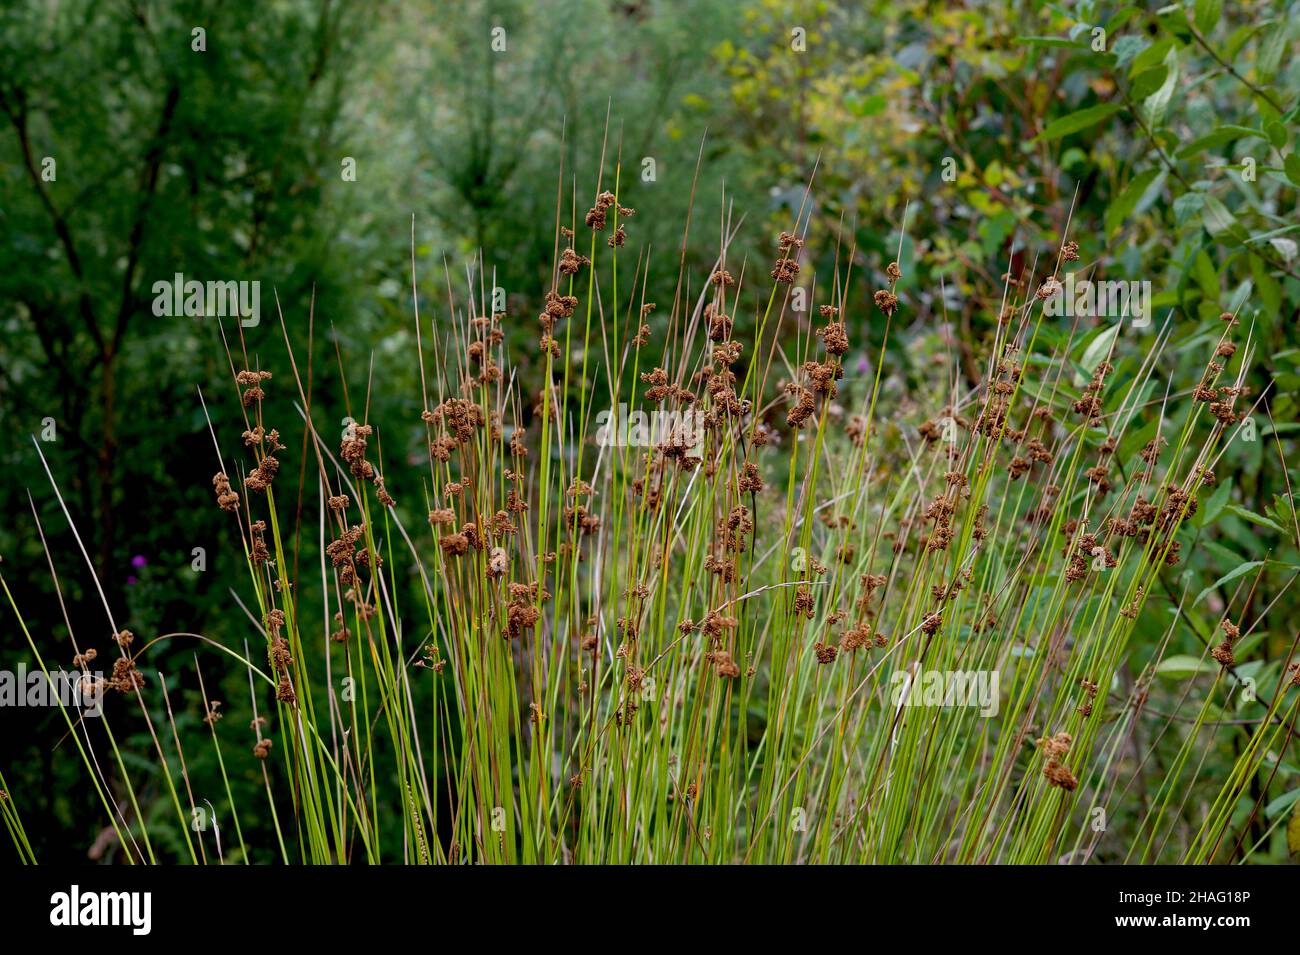 These rushes are Juncus Procerus. There are lots of Juncus species in Australia, and this is one of the most common - yet has no common name! Stock Photo